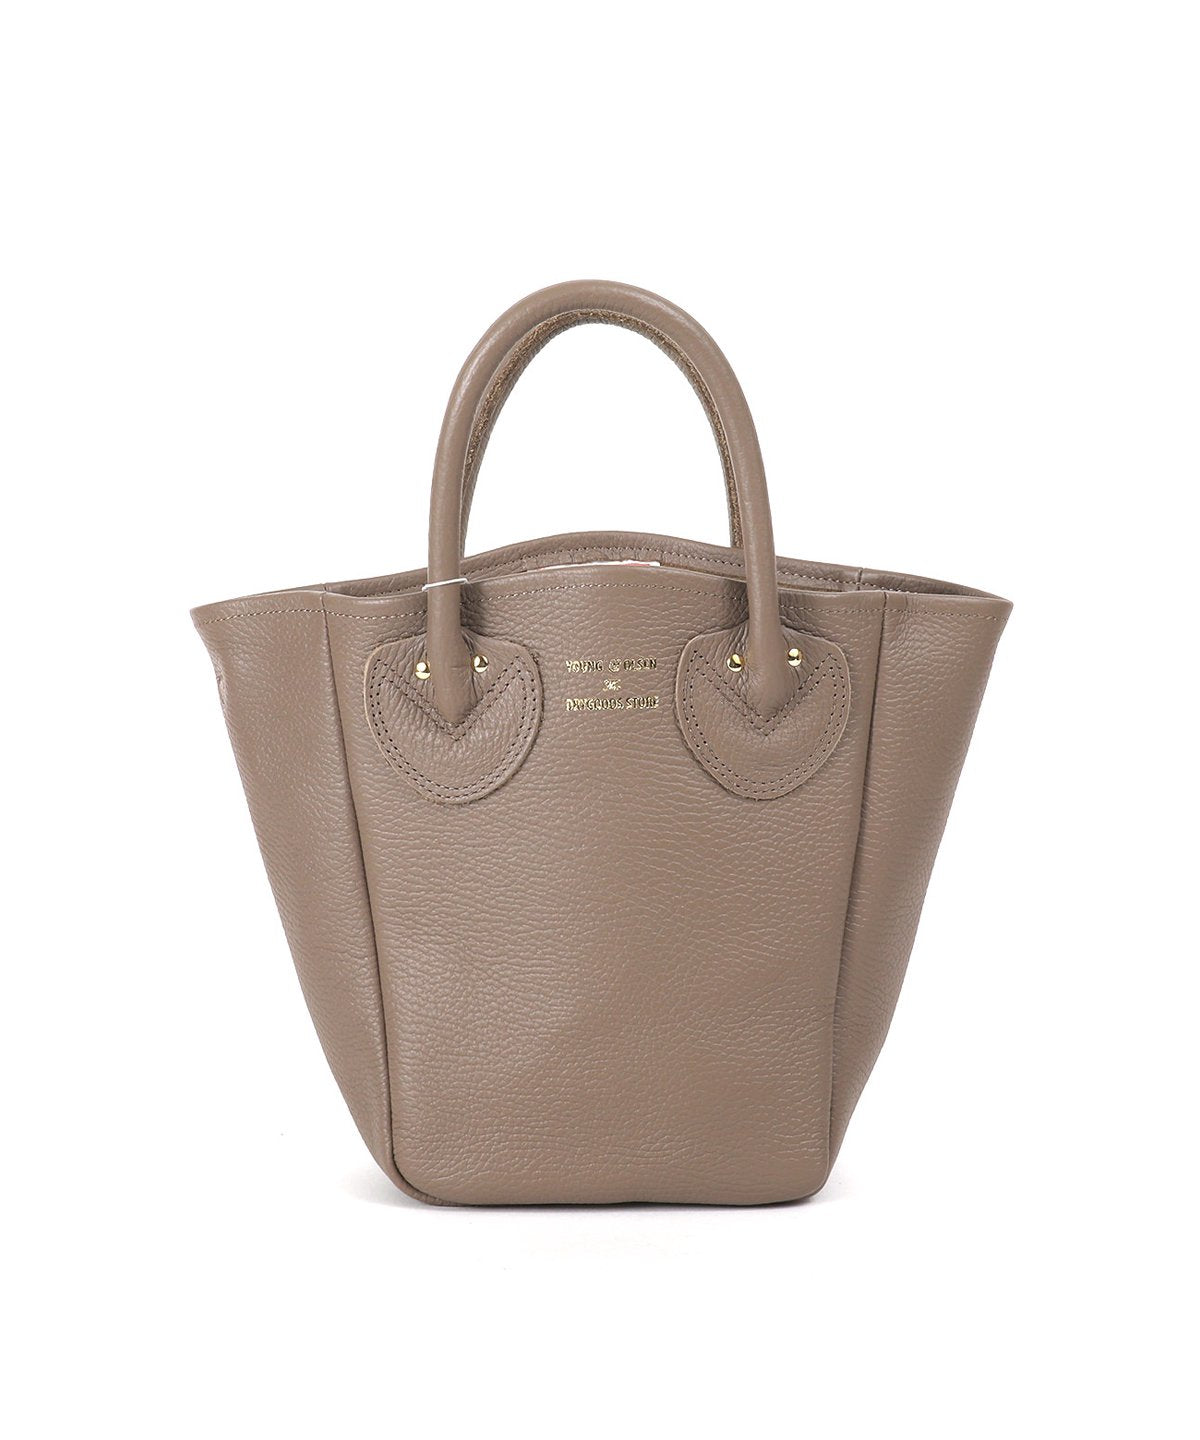 Young and Olsen petit leather tote bag